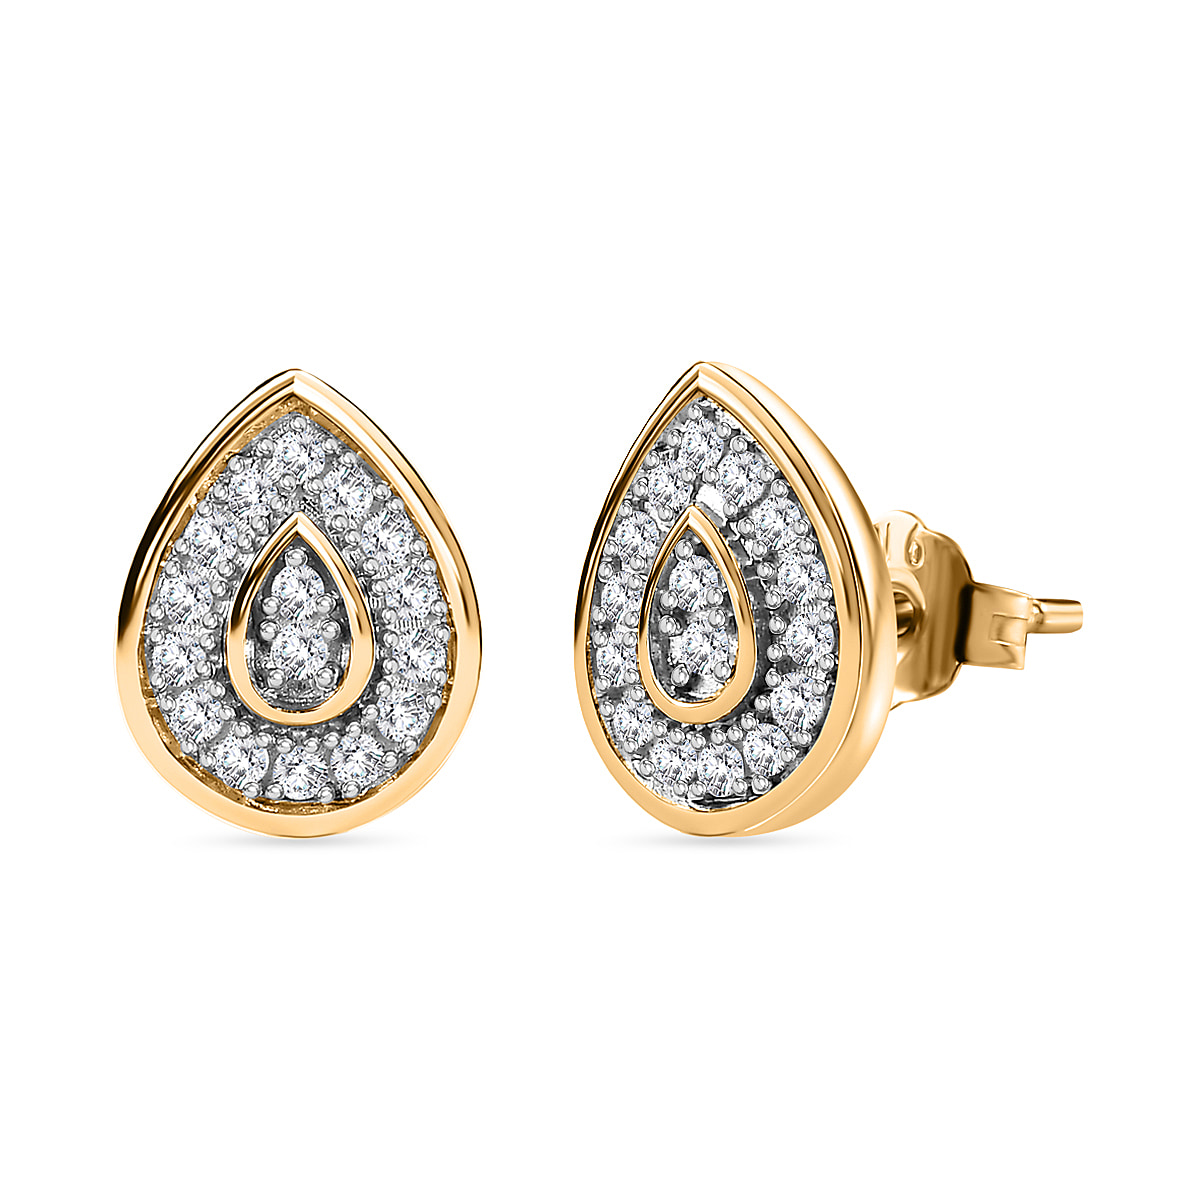 9K Yellow Gold  I3   White Diamond  I3 Solitaire Stud Push Post Earring 0.20 ct,  Gold Wt. 0.88 Gms  0.198  Ct.